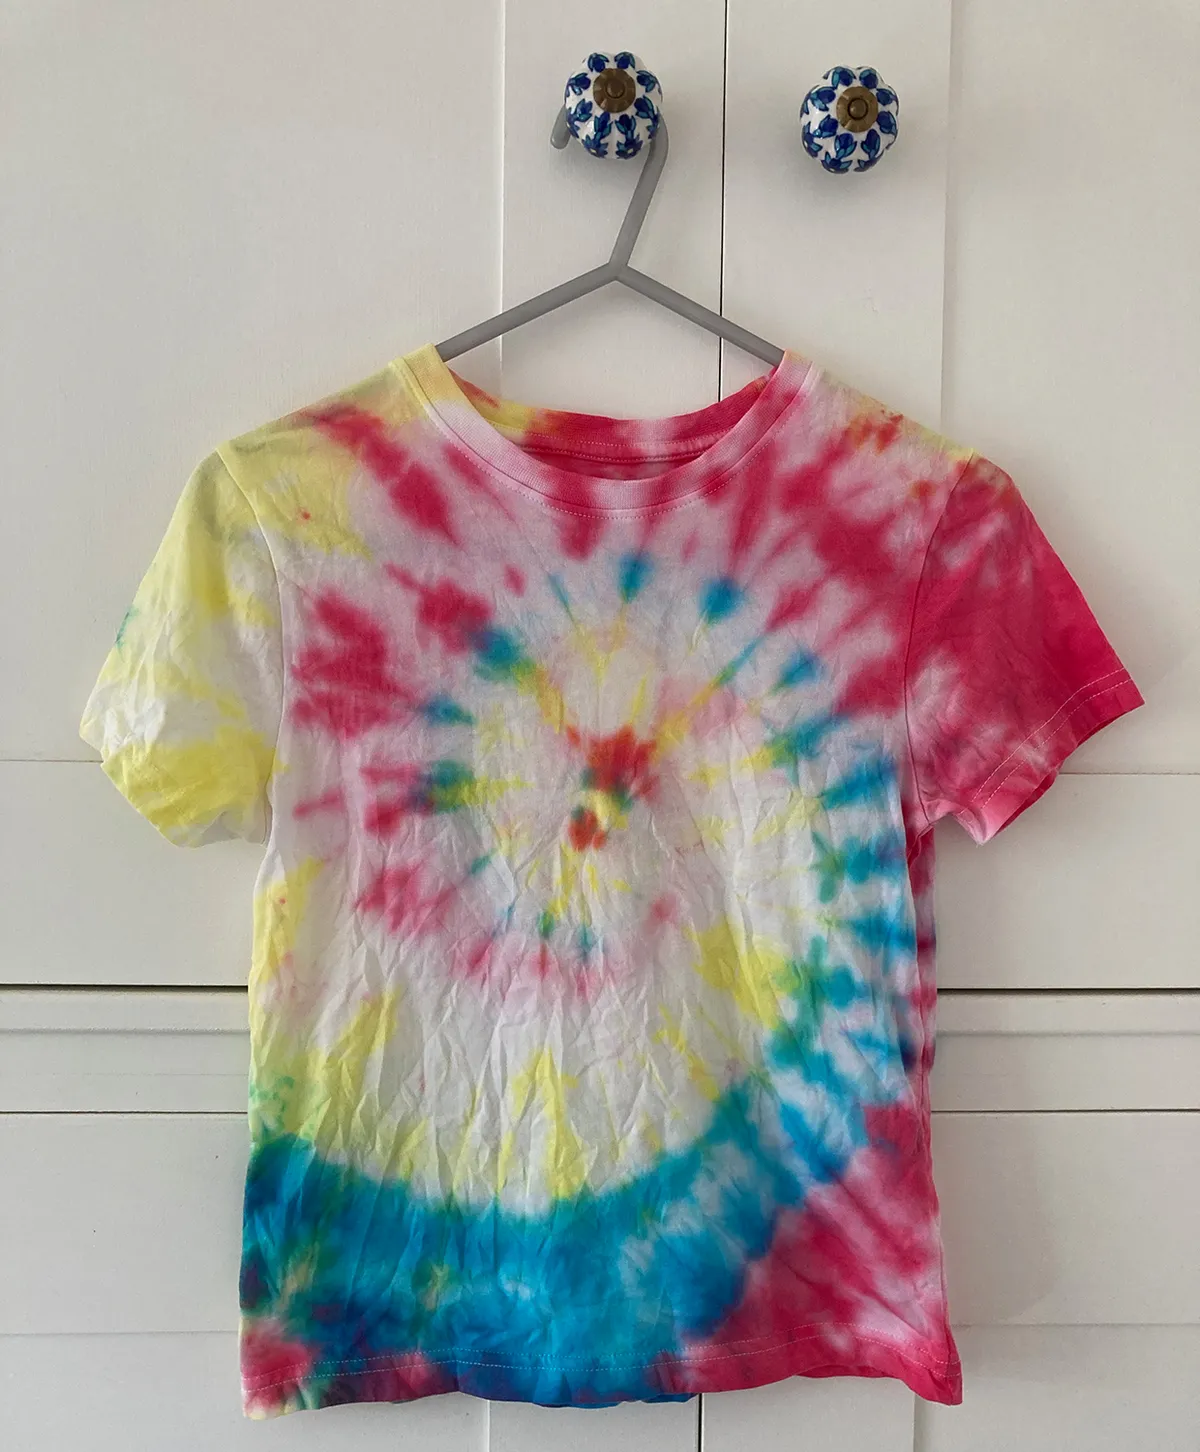 How to tie dye a shirt – step by step guide for beginners - Gathered